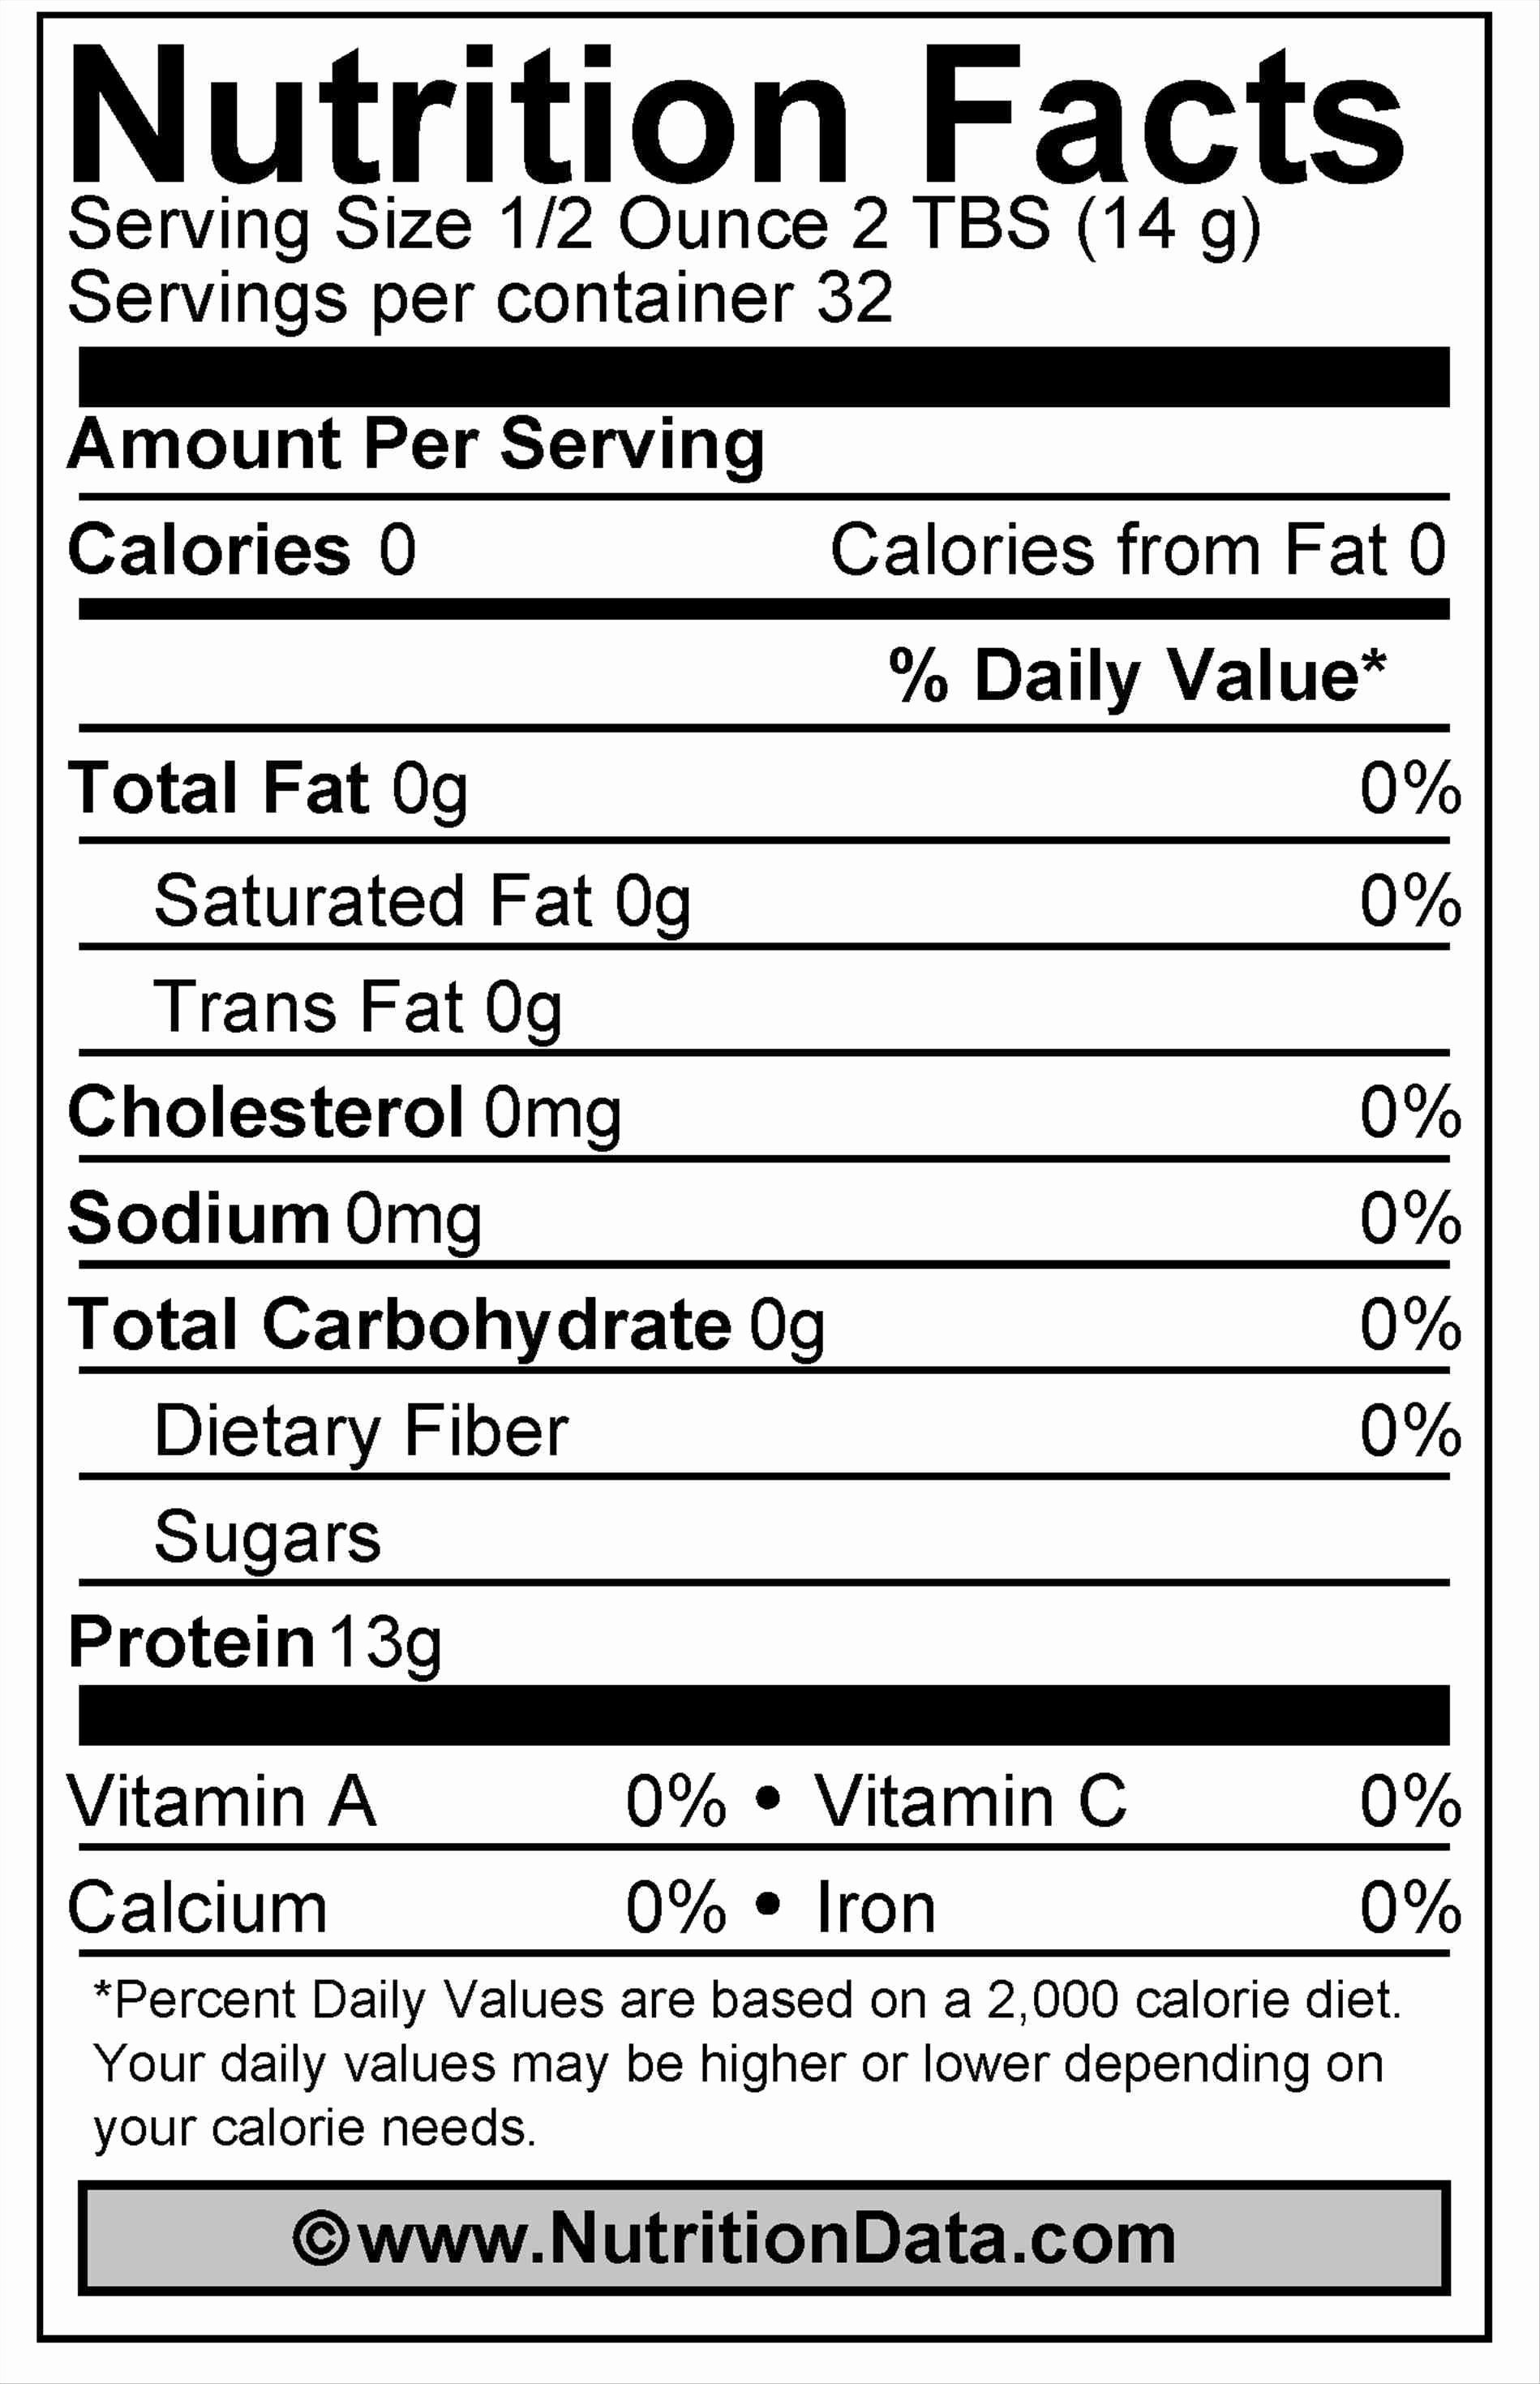 Nutrition Facts Blank 2018 Ogahealth